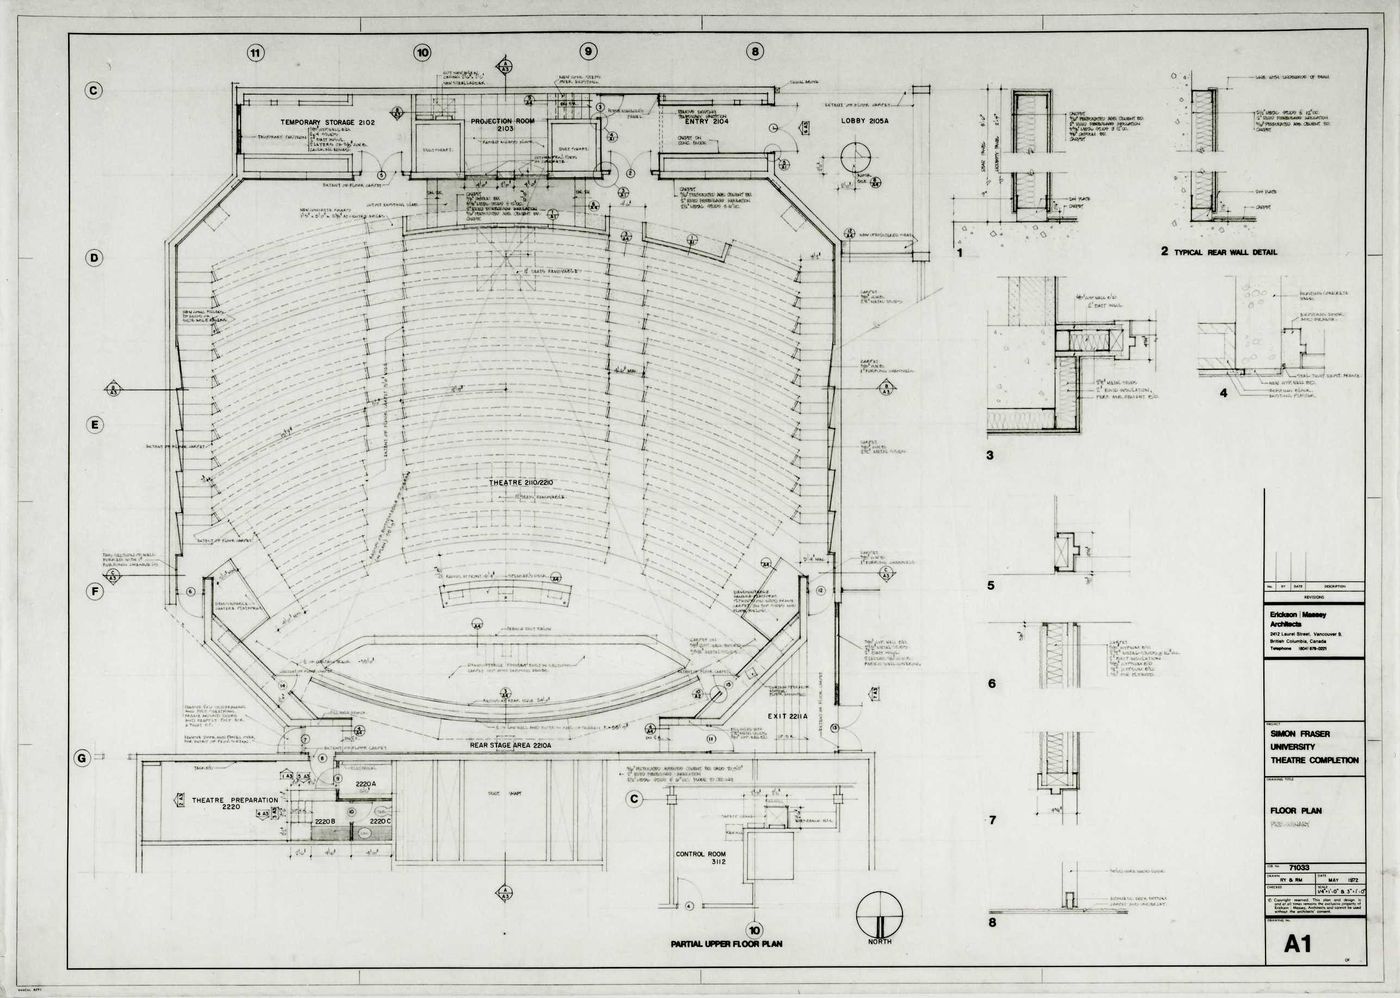 Site plan, wall details